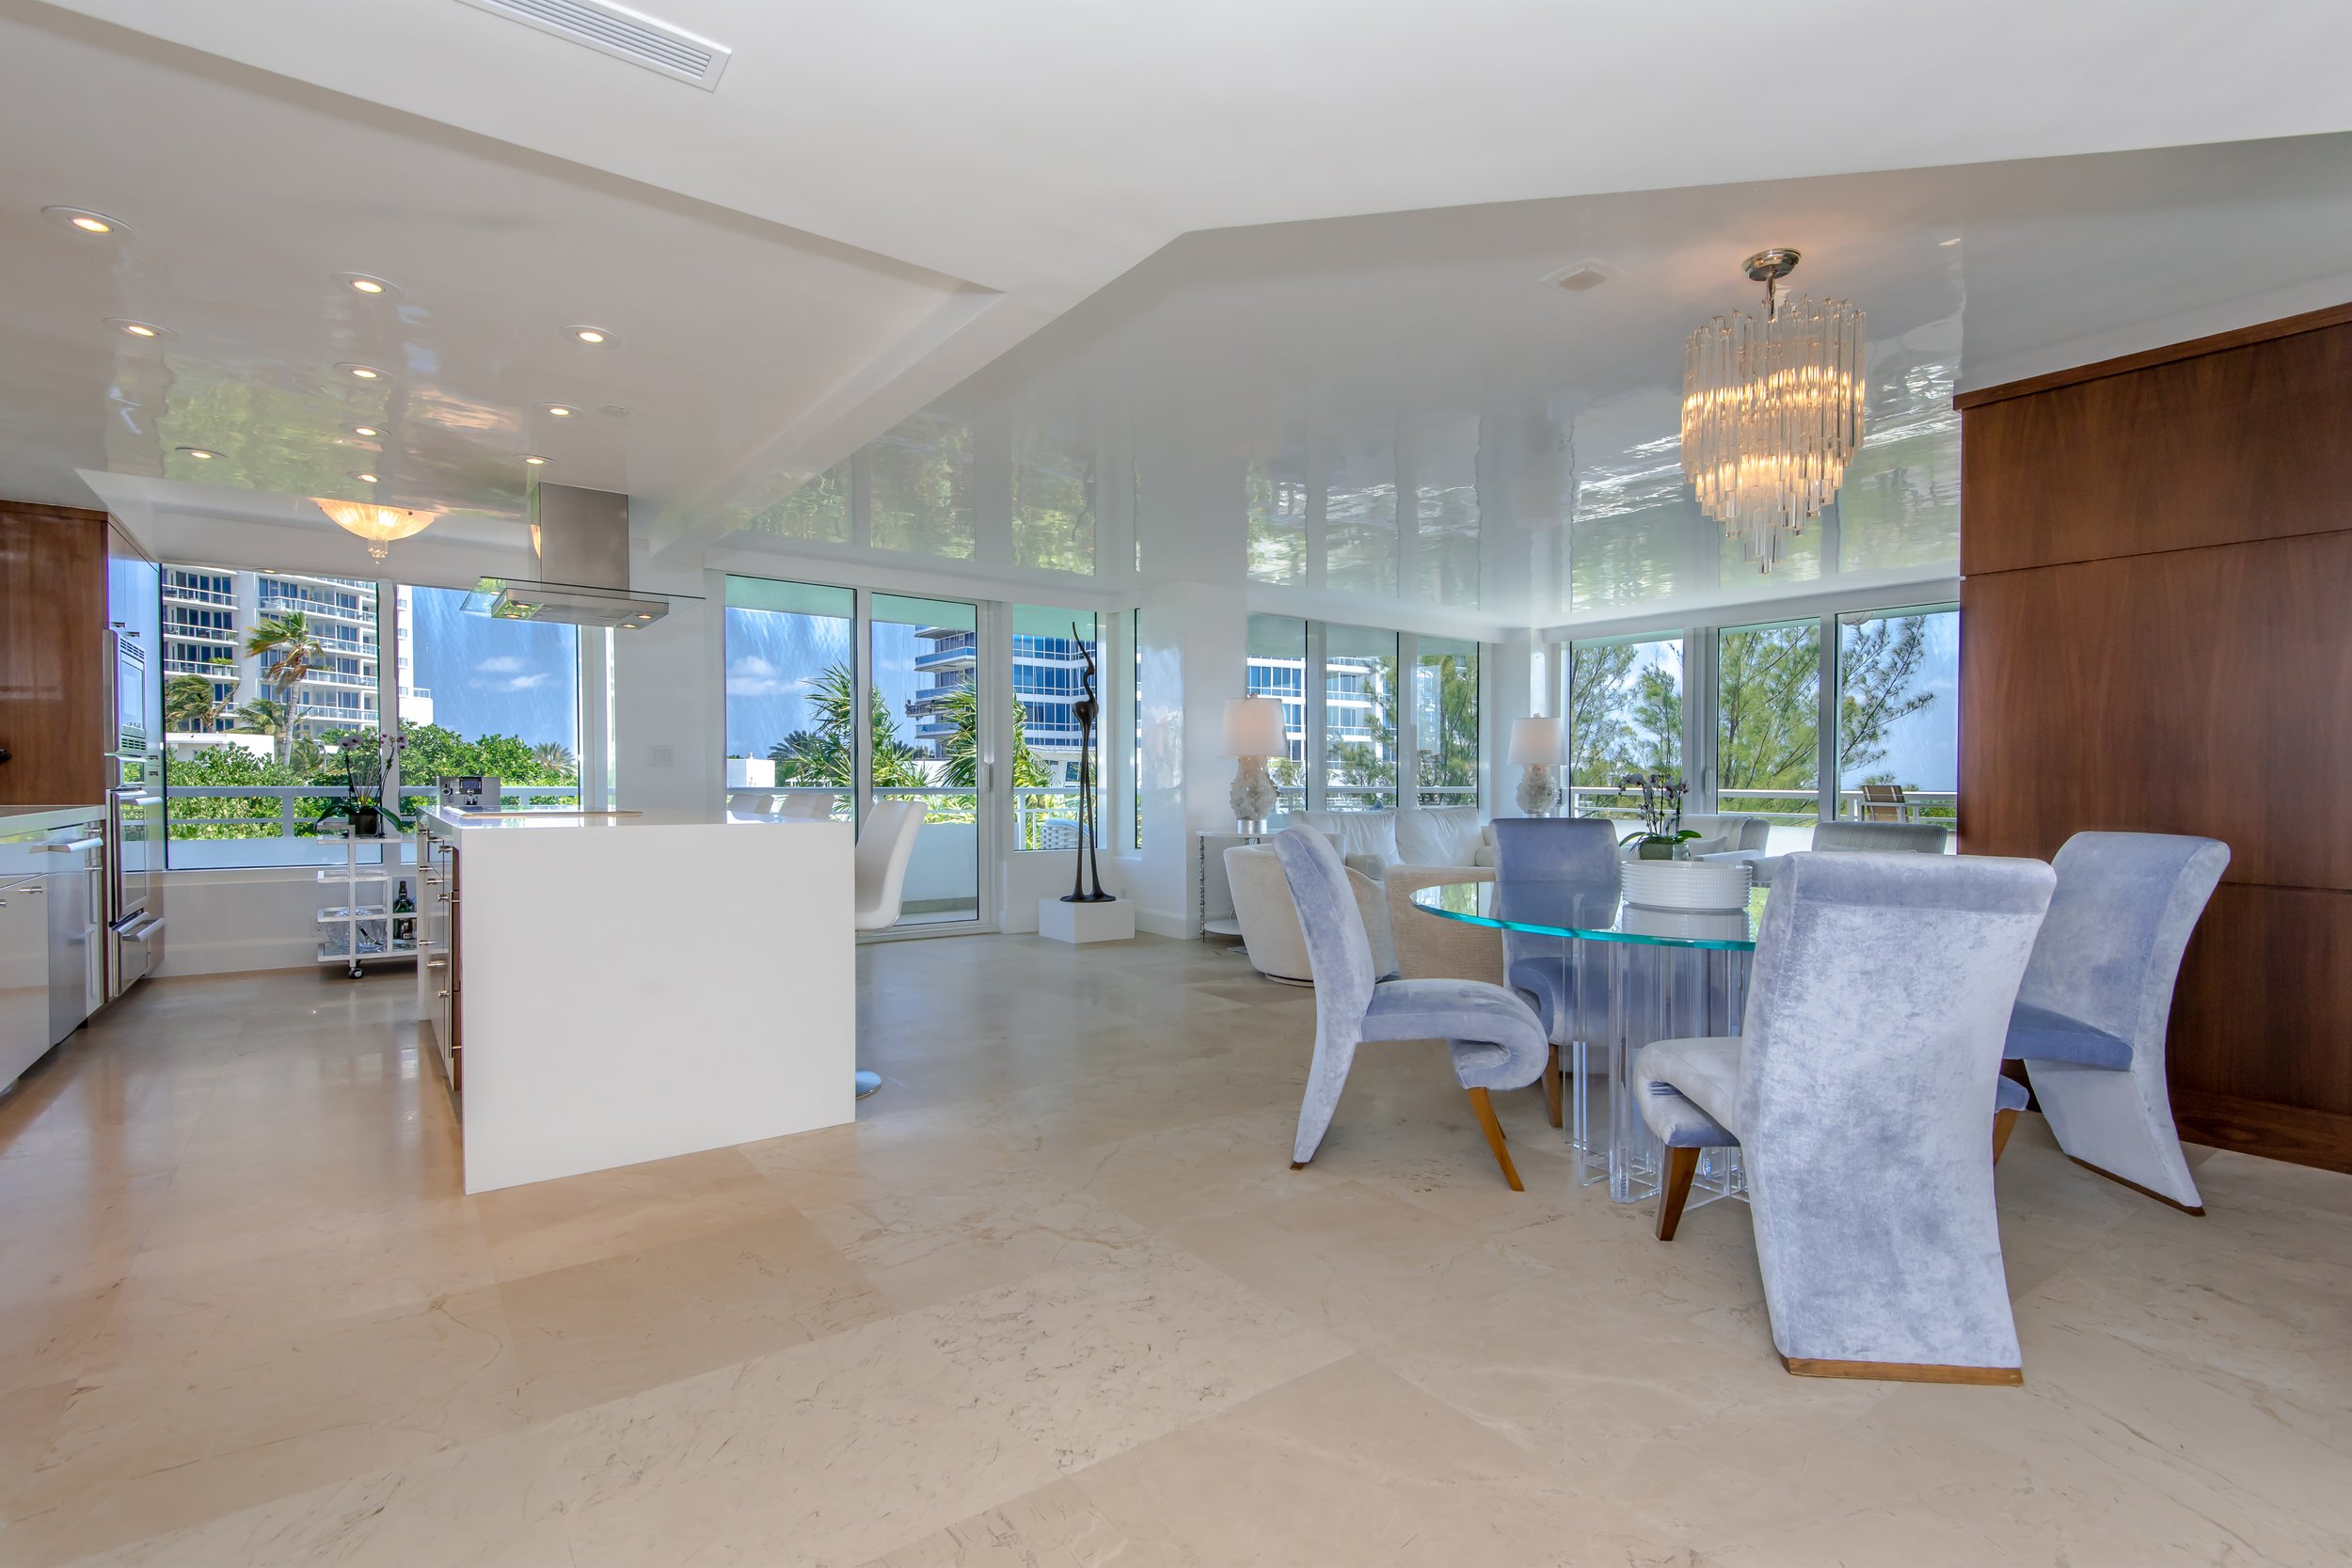 Master Brokers Forum Listing: Check Out This South Beach Corner Unit In South Pointe Tower Asking $2.75 Million 1.jpg